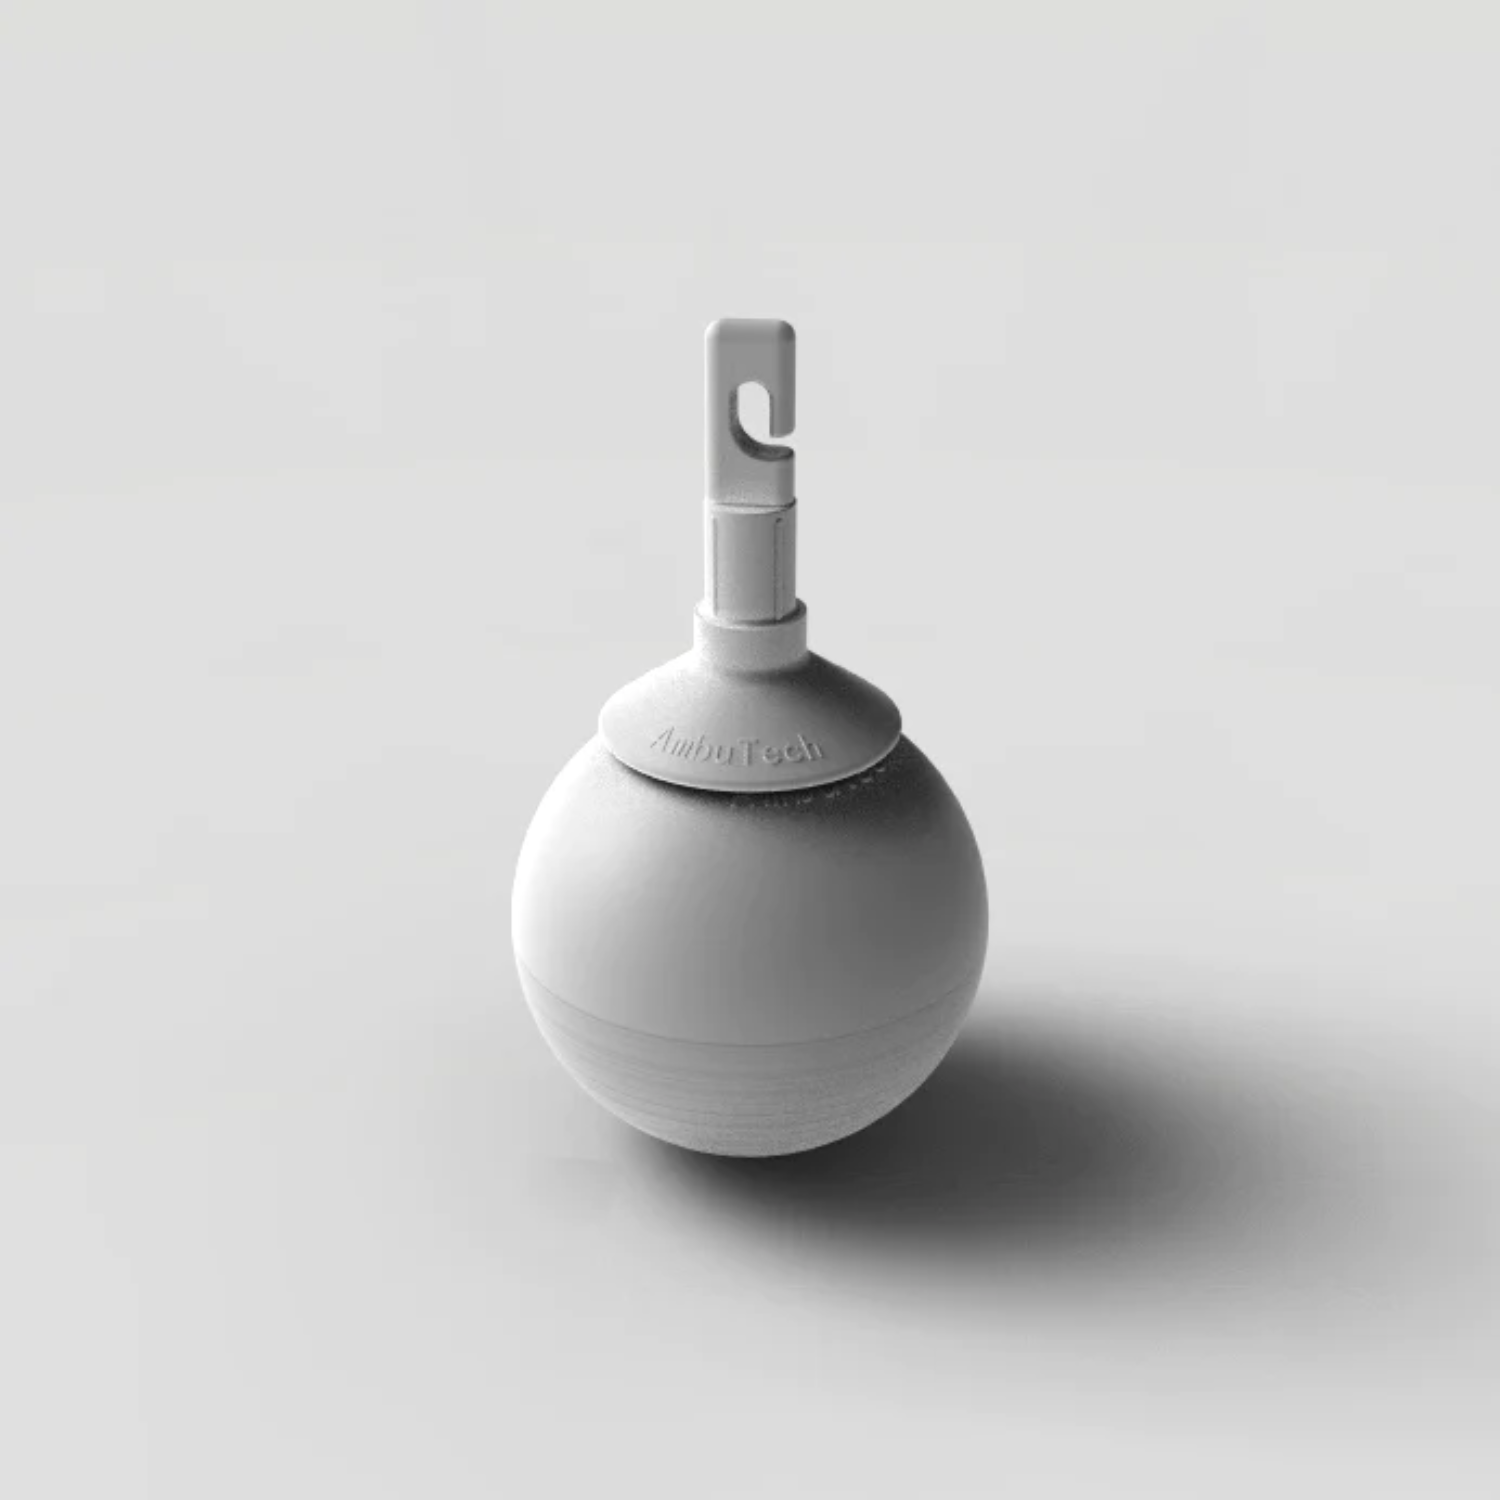 Image of a white hook on style rolling ball tip for mobility canes from Ambutech